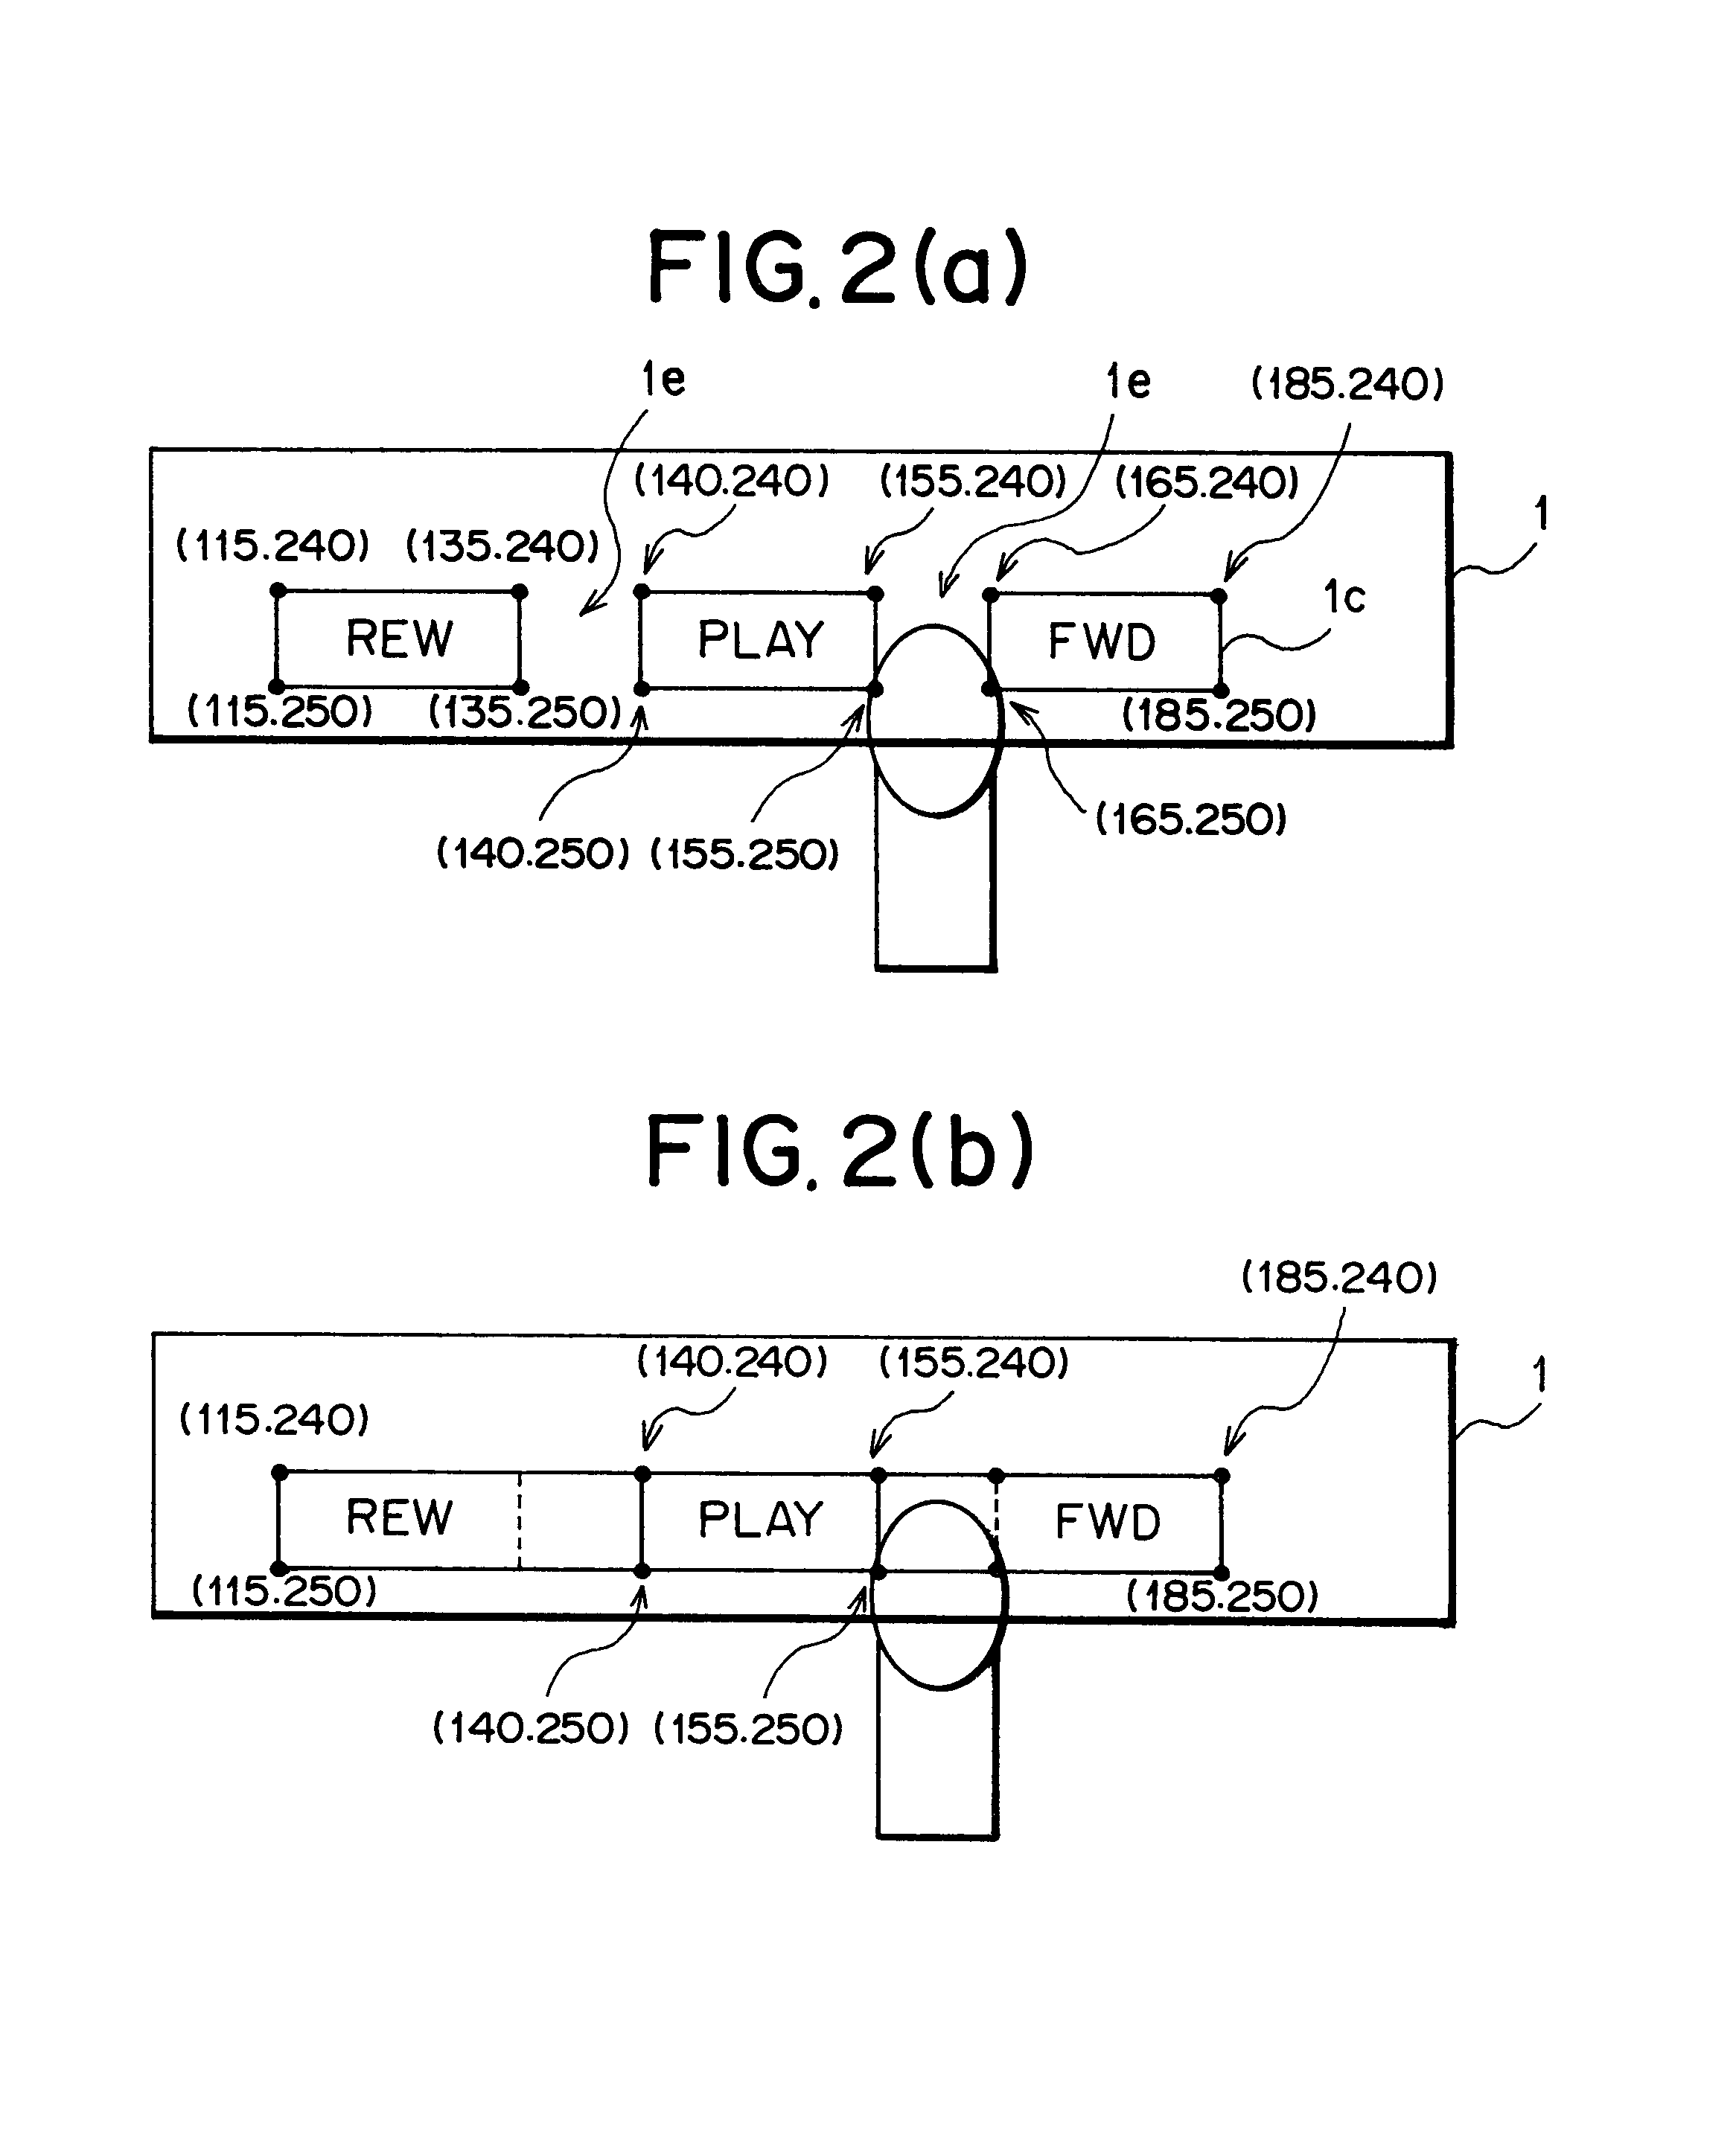 Operating device for controlling electronic devices utilizing a touch panel